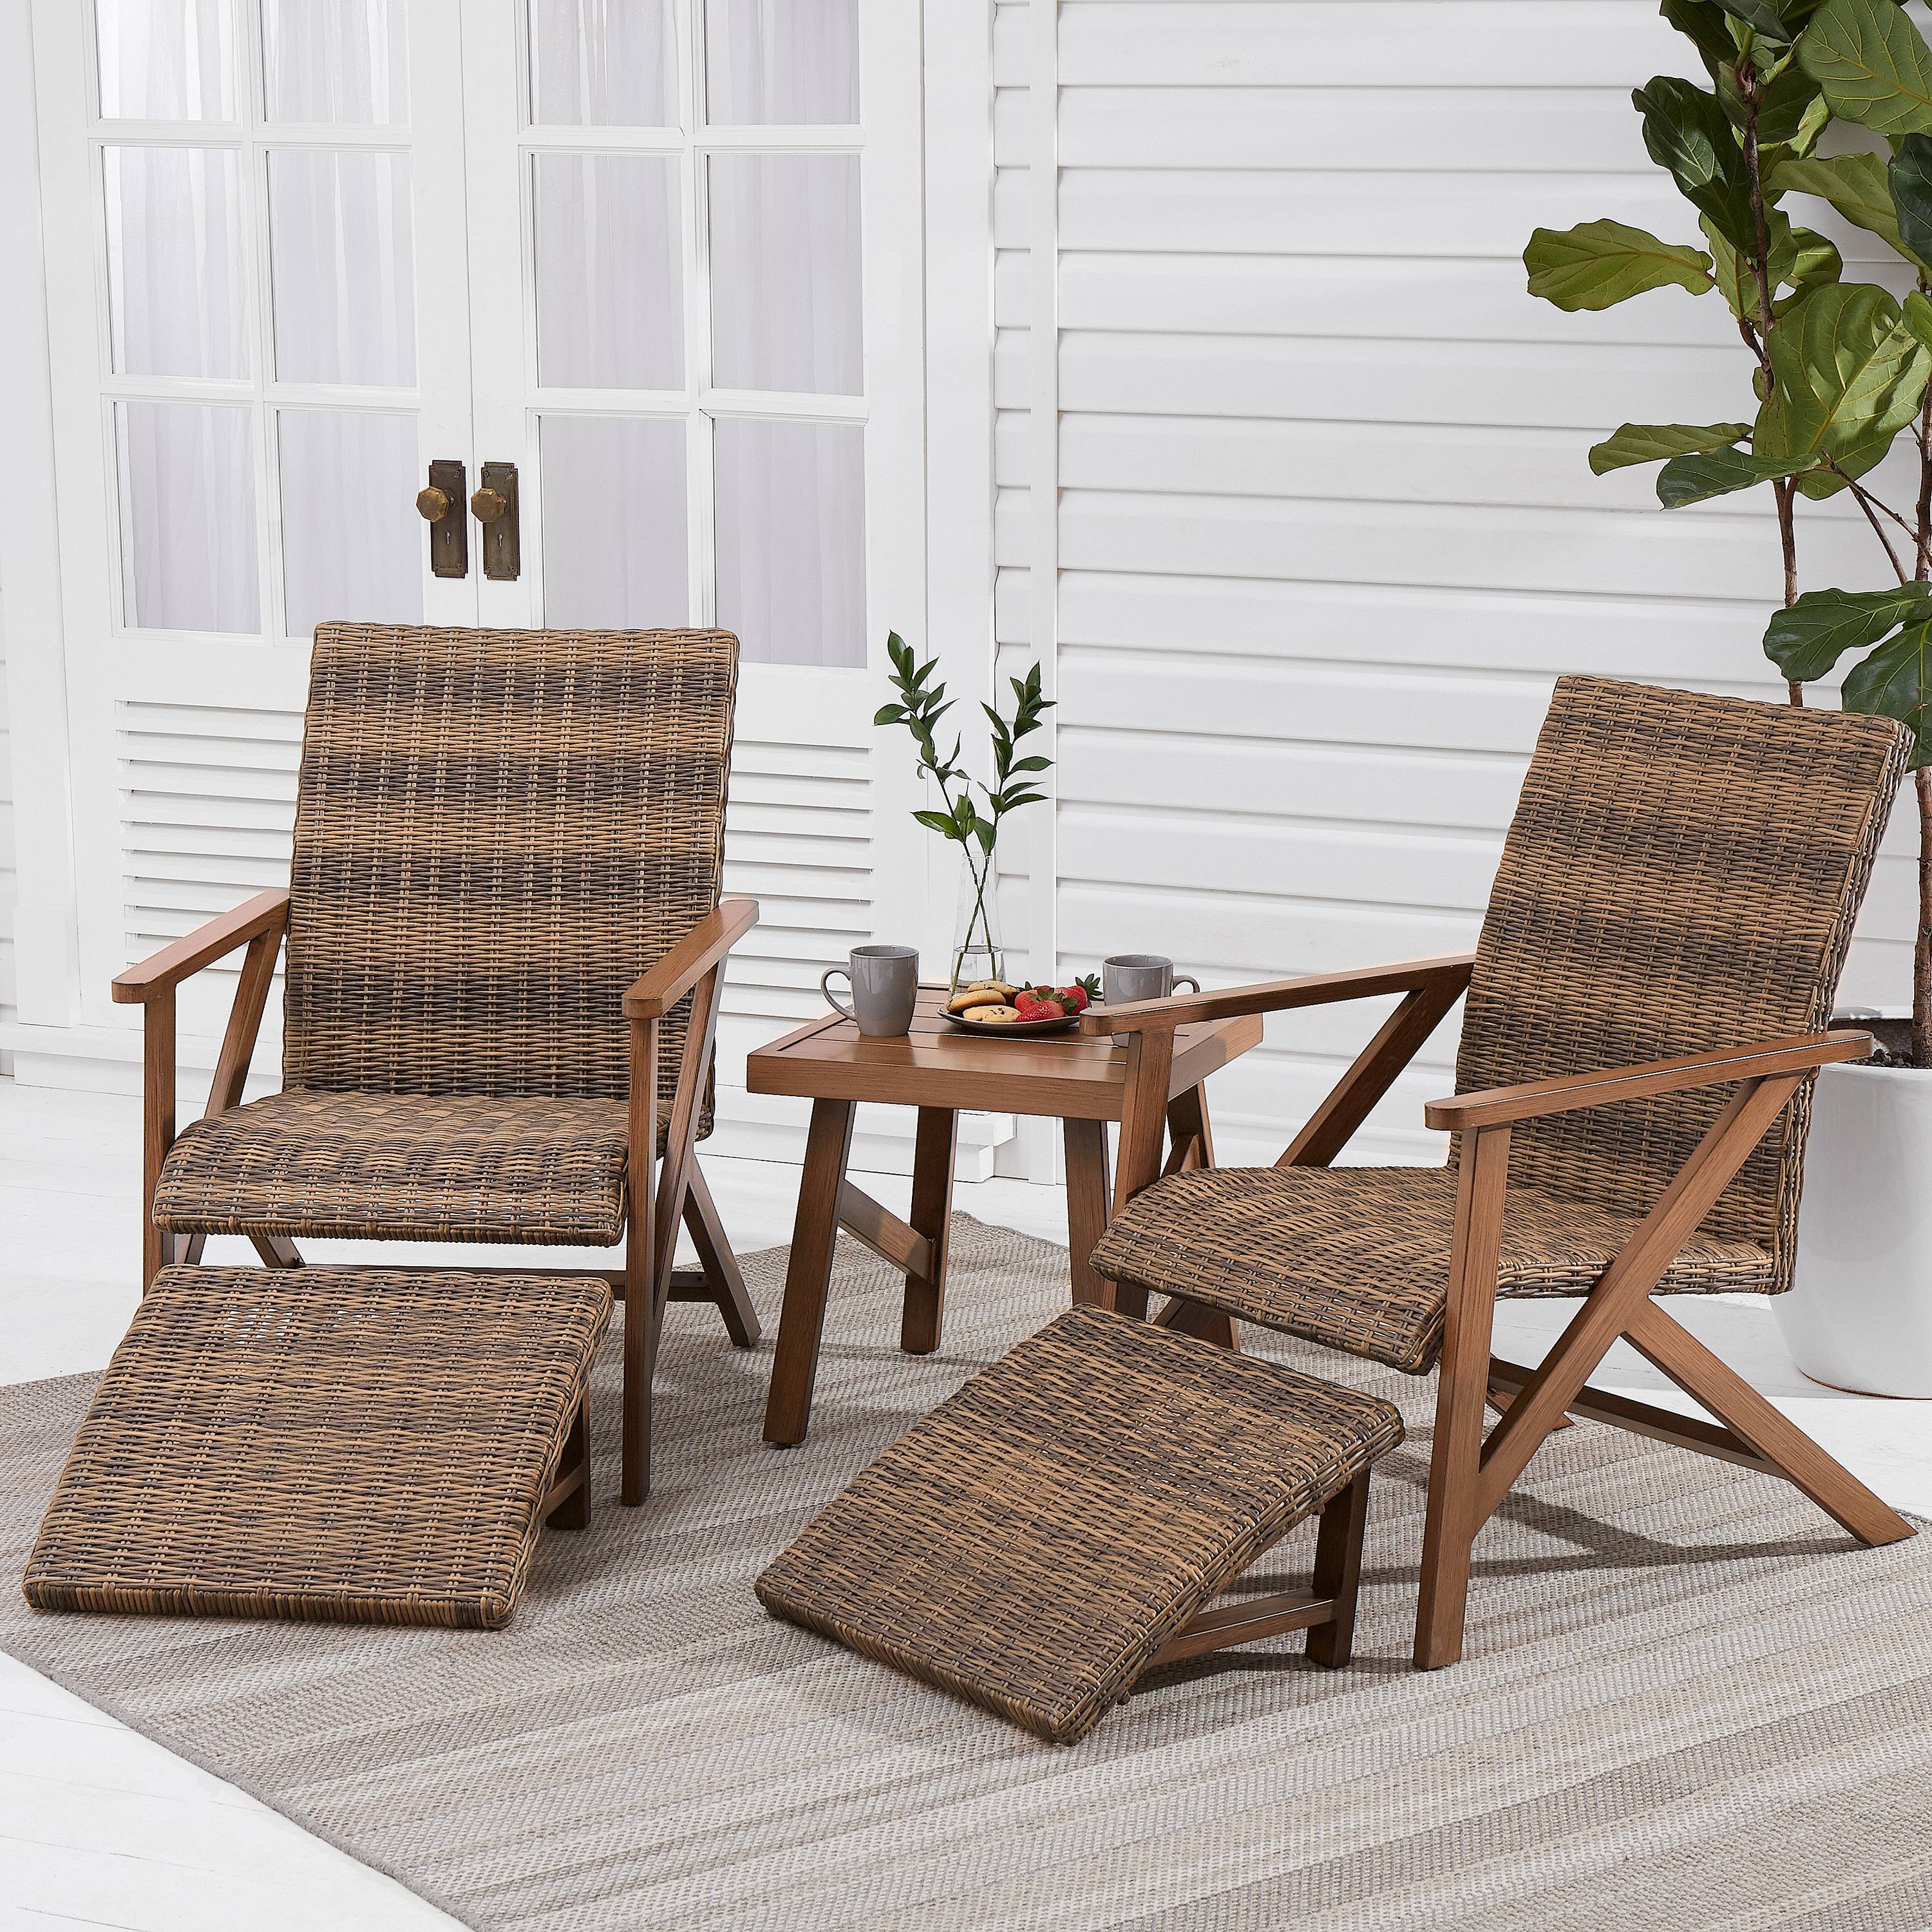 Better Homes And Gardens Kewich 5 piece Chat Set - image 1 of 6